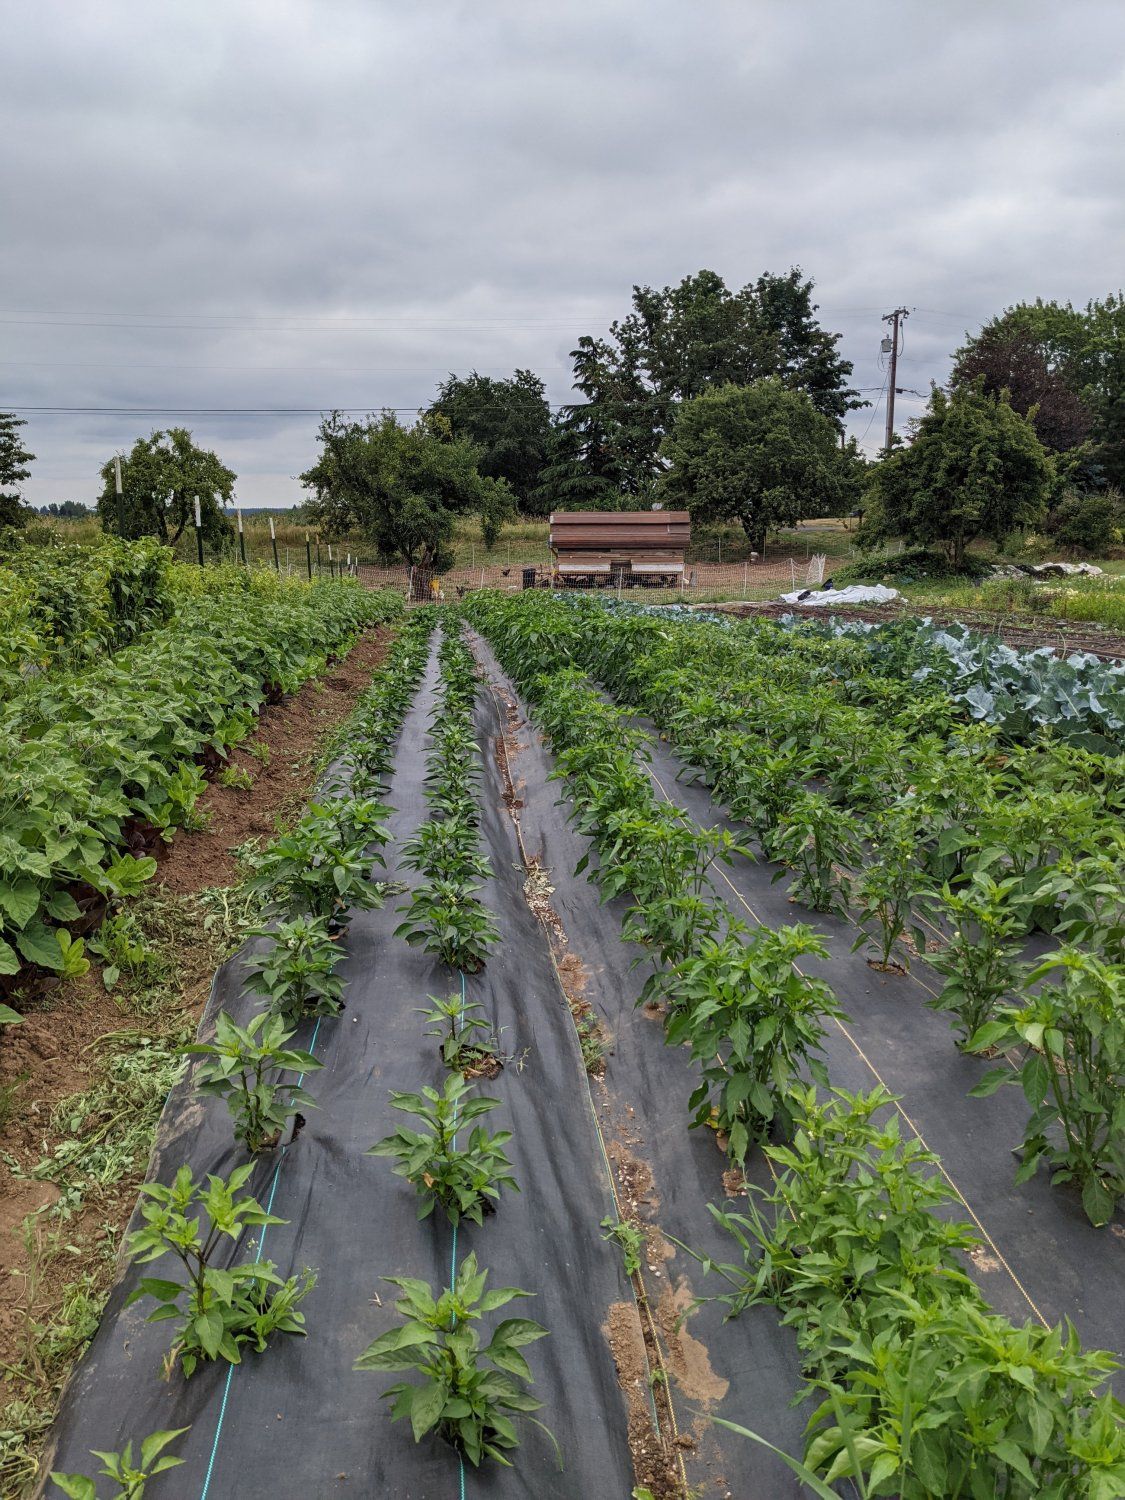 Next Happening: Farm Happening's for July 12